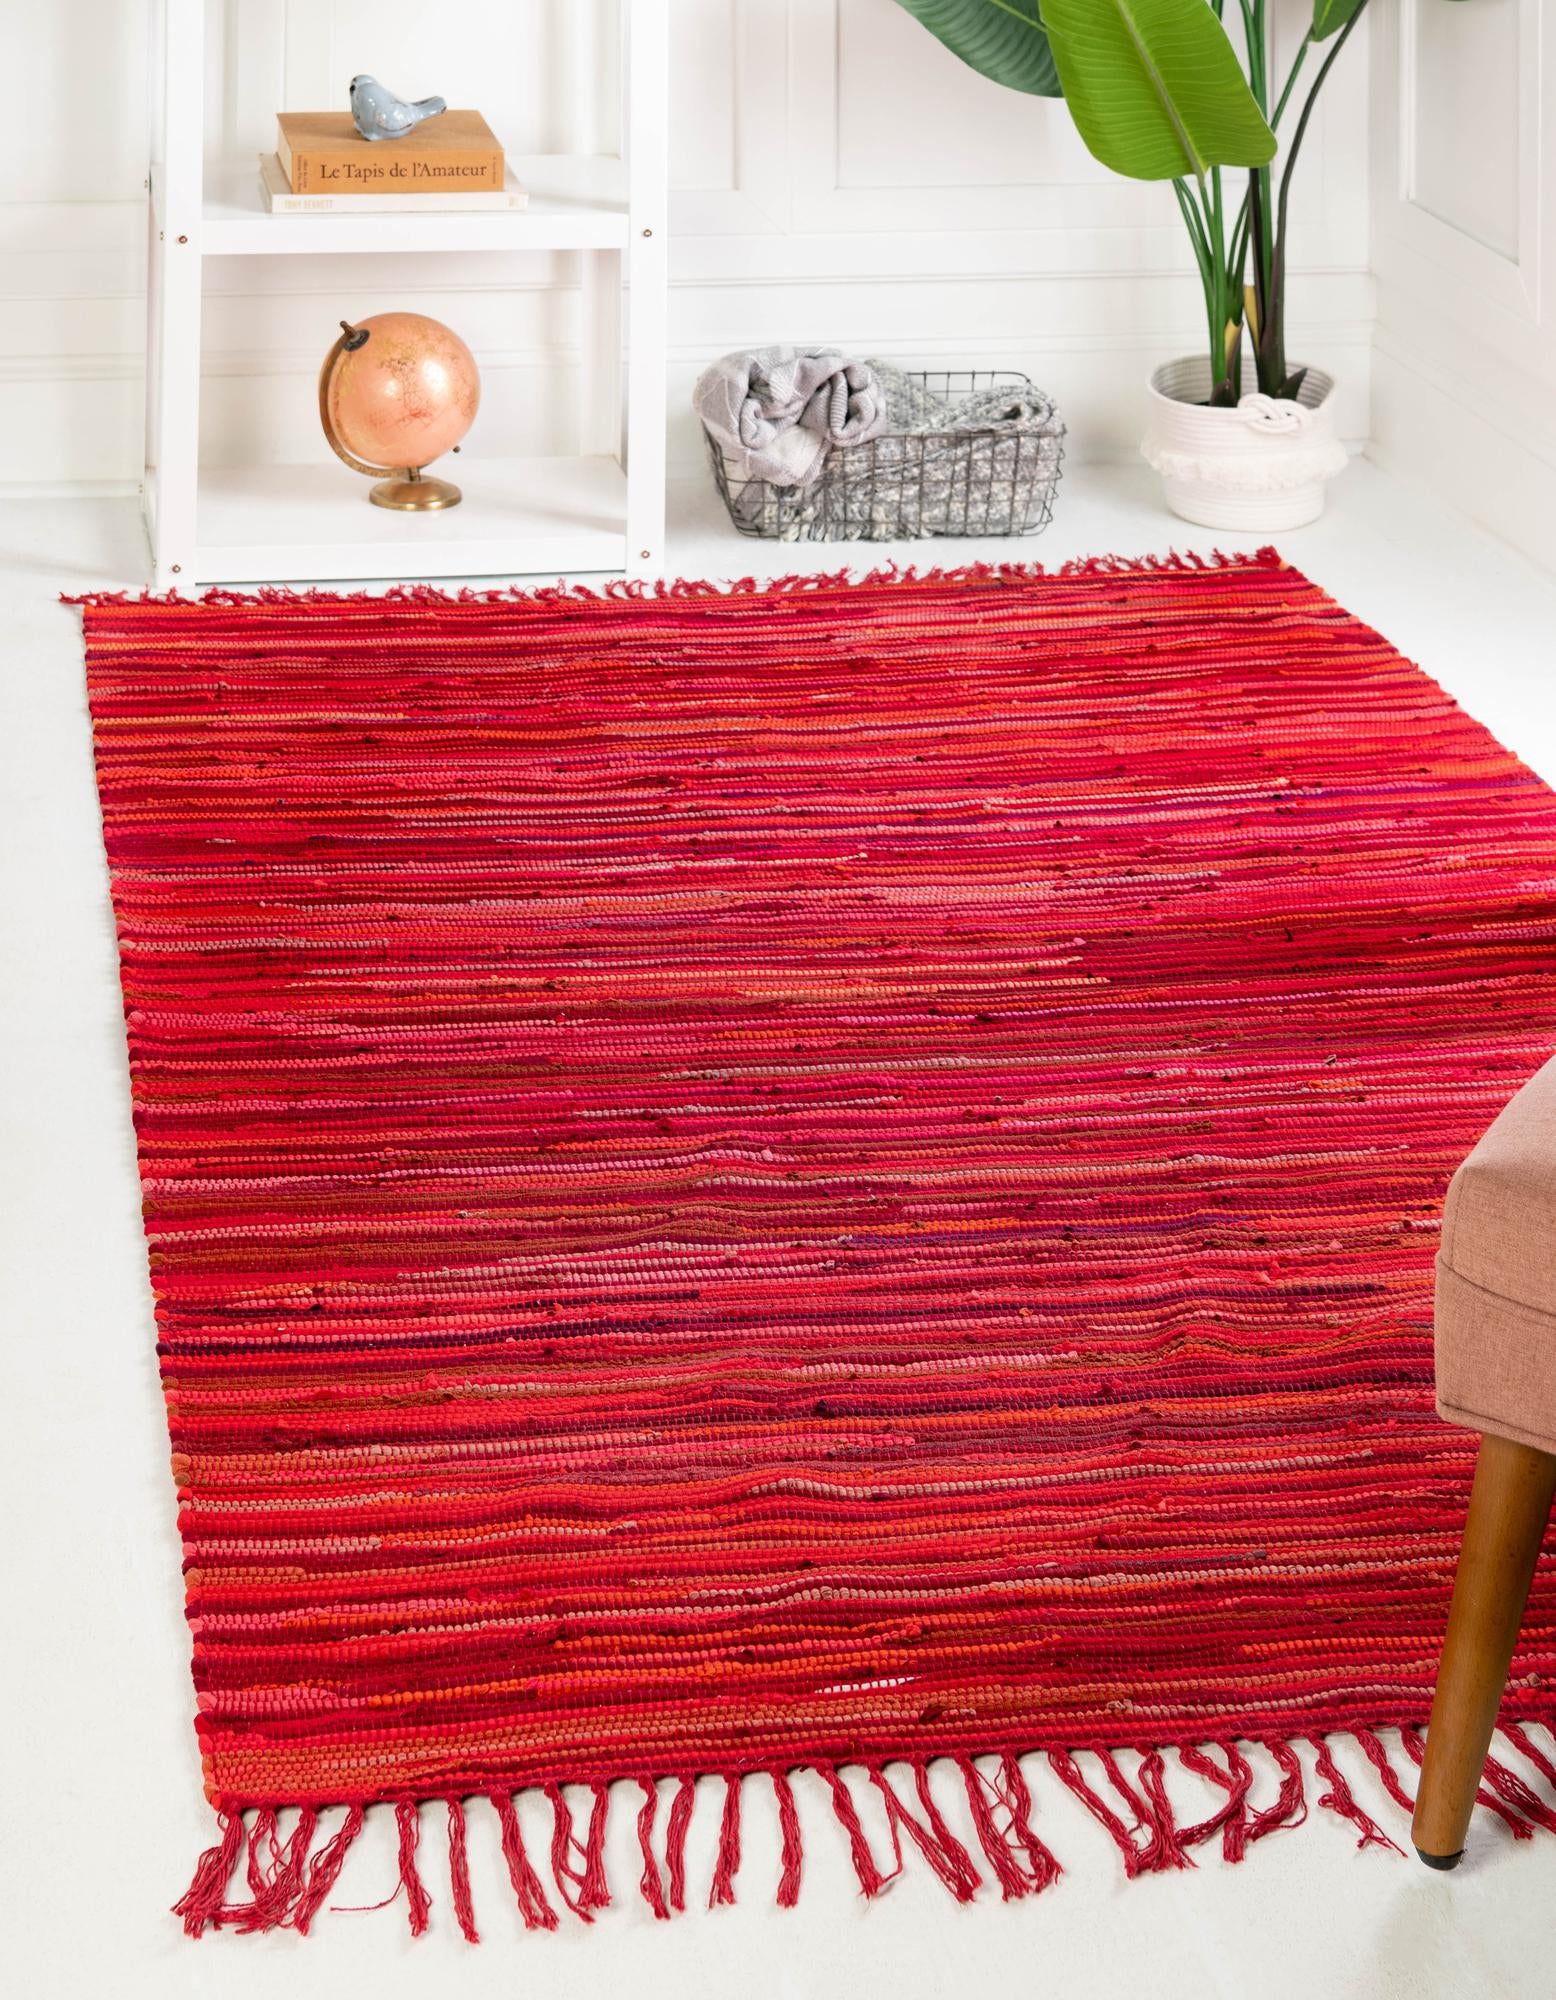 Unique Loom Striped Chindi Cotton Rug Red/Burgundy 8' x 10' Rectangle Hand Made Geometric Modern Perfect For Living Room Bed Room Dining Room Office - image 1 of 6